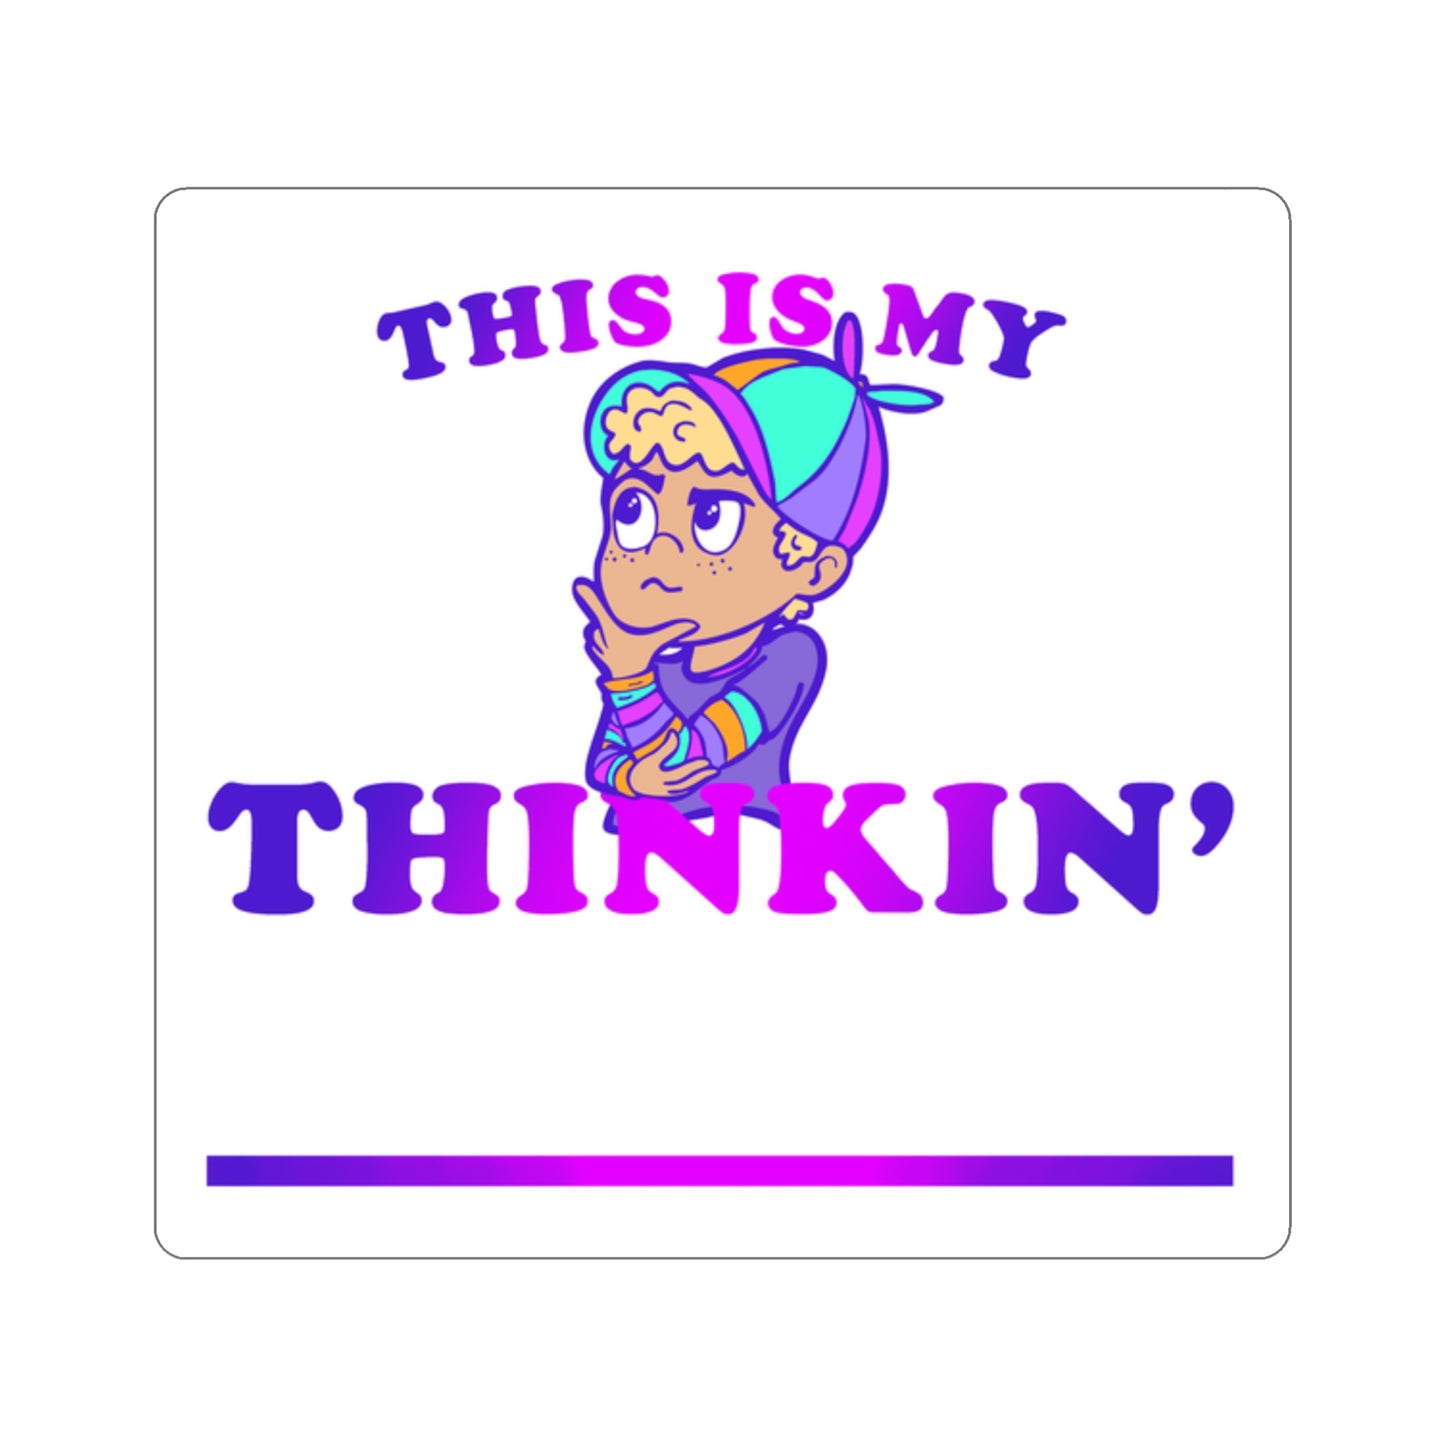 "This is My Thinkin' (fill in the blank)" - White - Kiss-Cut Stickers